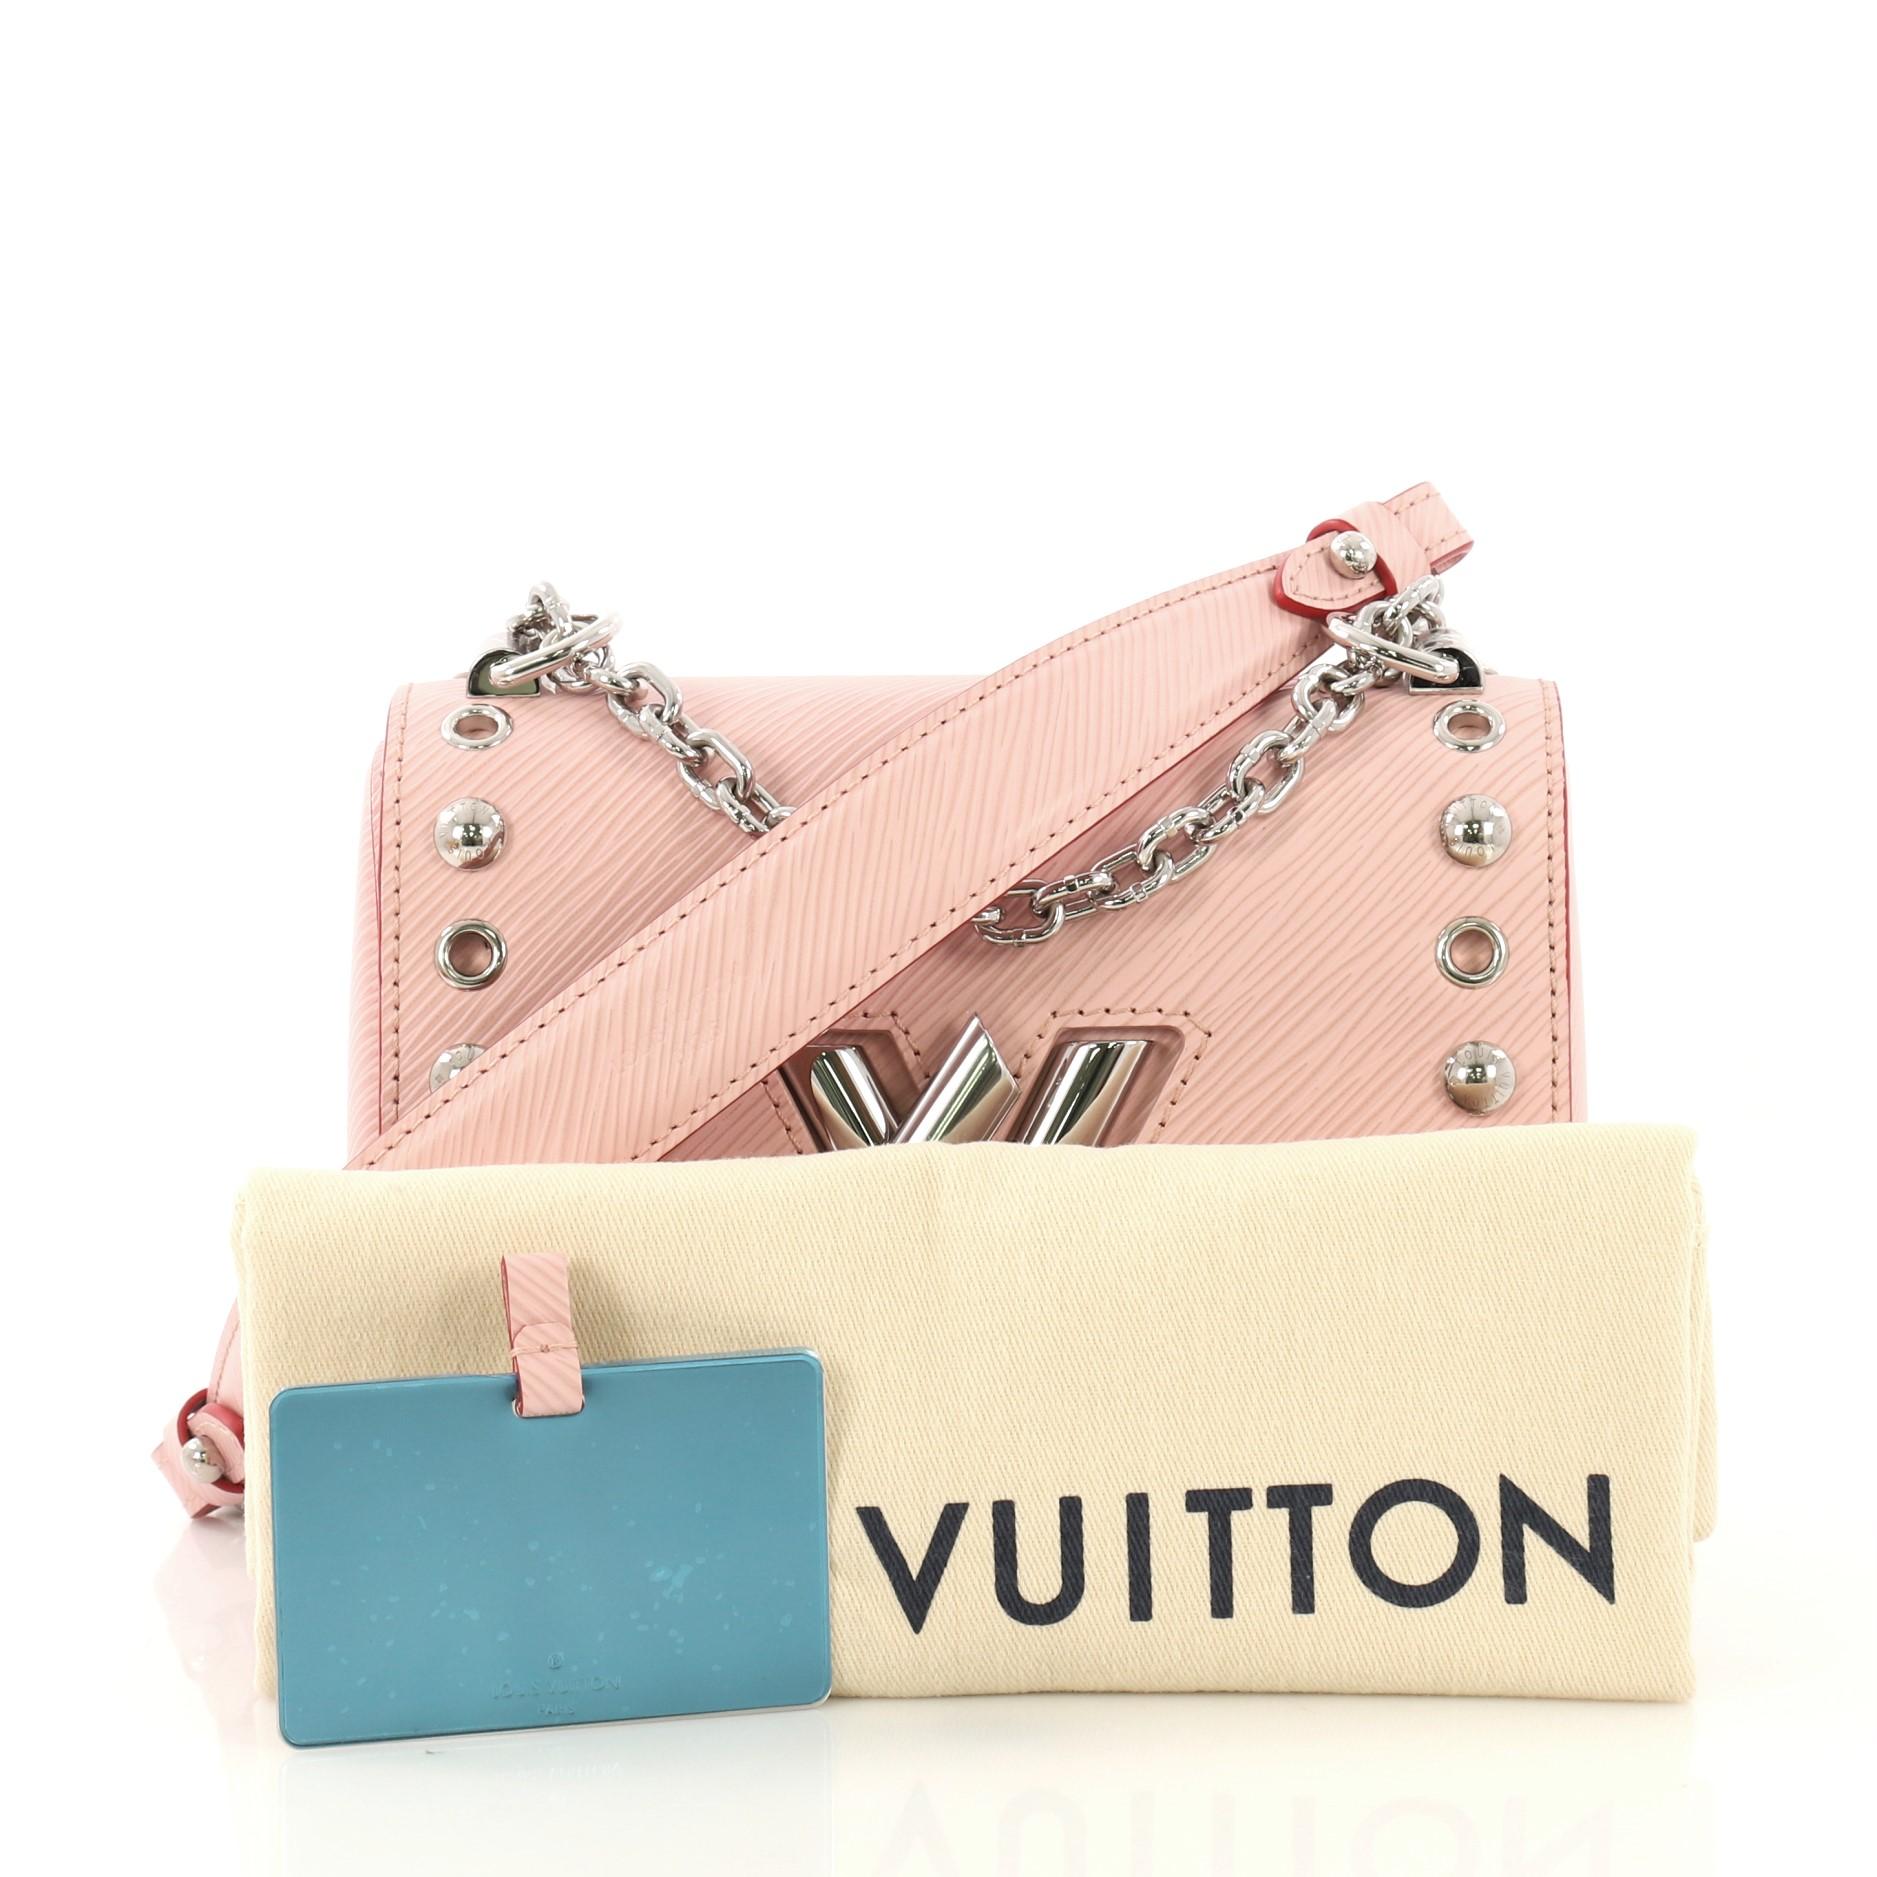 This Louis Vuitton Twist Handbag Studded Epi Leather PM, crafted in light pink studded epi leather, features a waved base silhouette, chain link strap with leather pad, and silver-tone hardware. It opens to a light pink microfiber interior with slip